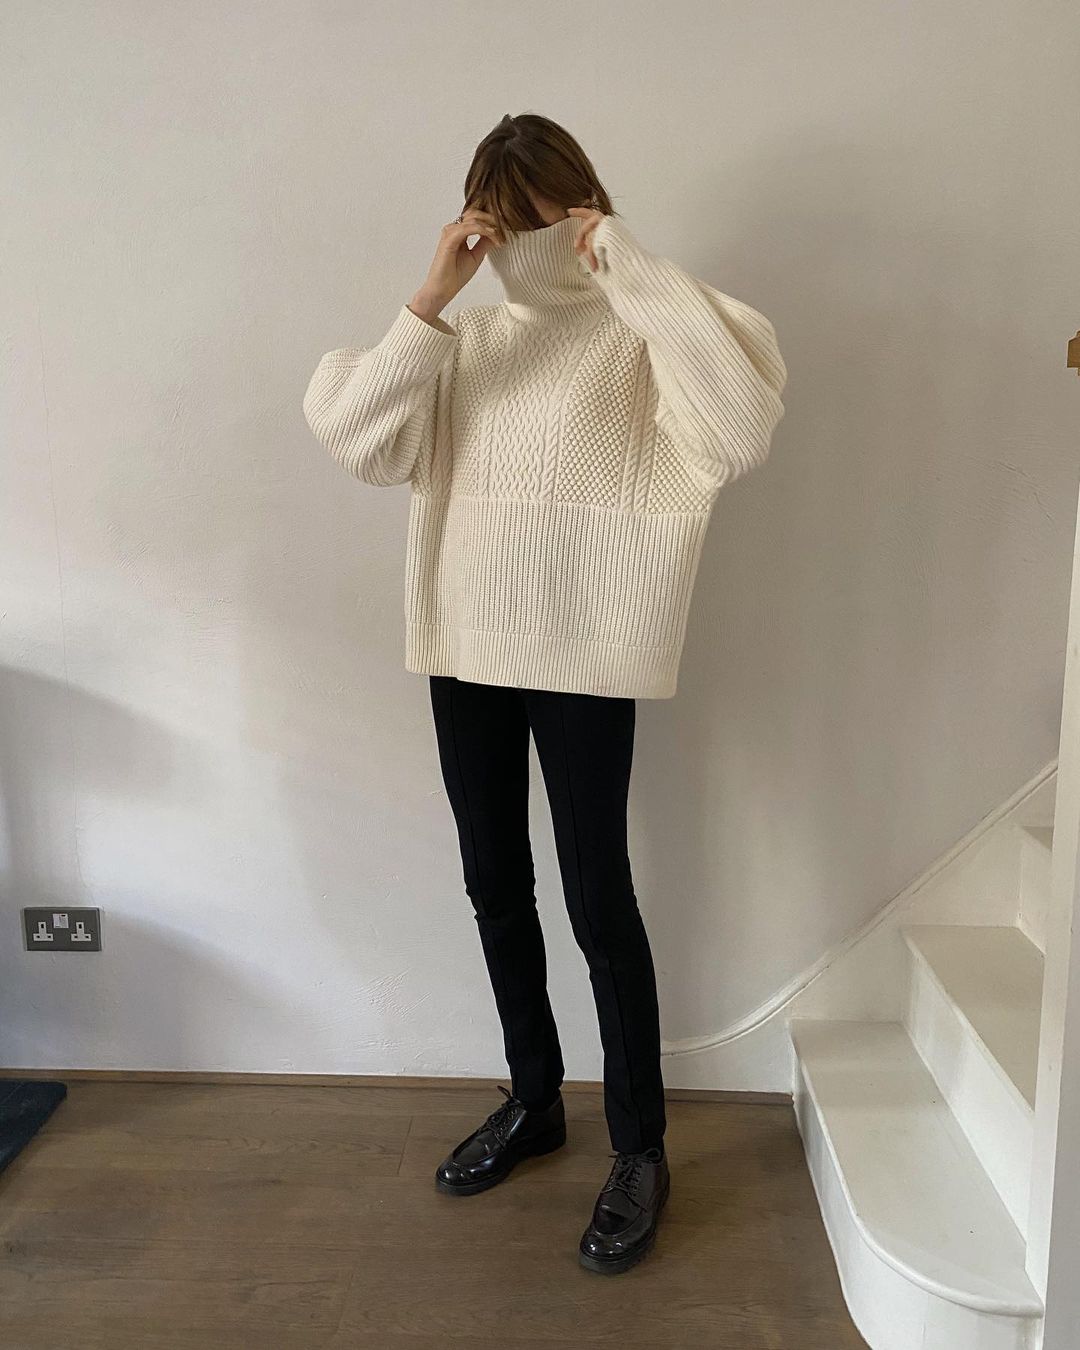 Le Fashion: This Turtleneck Outfit Is Ideal for Every Casual